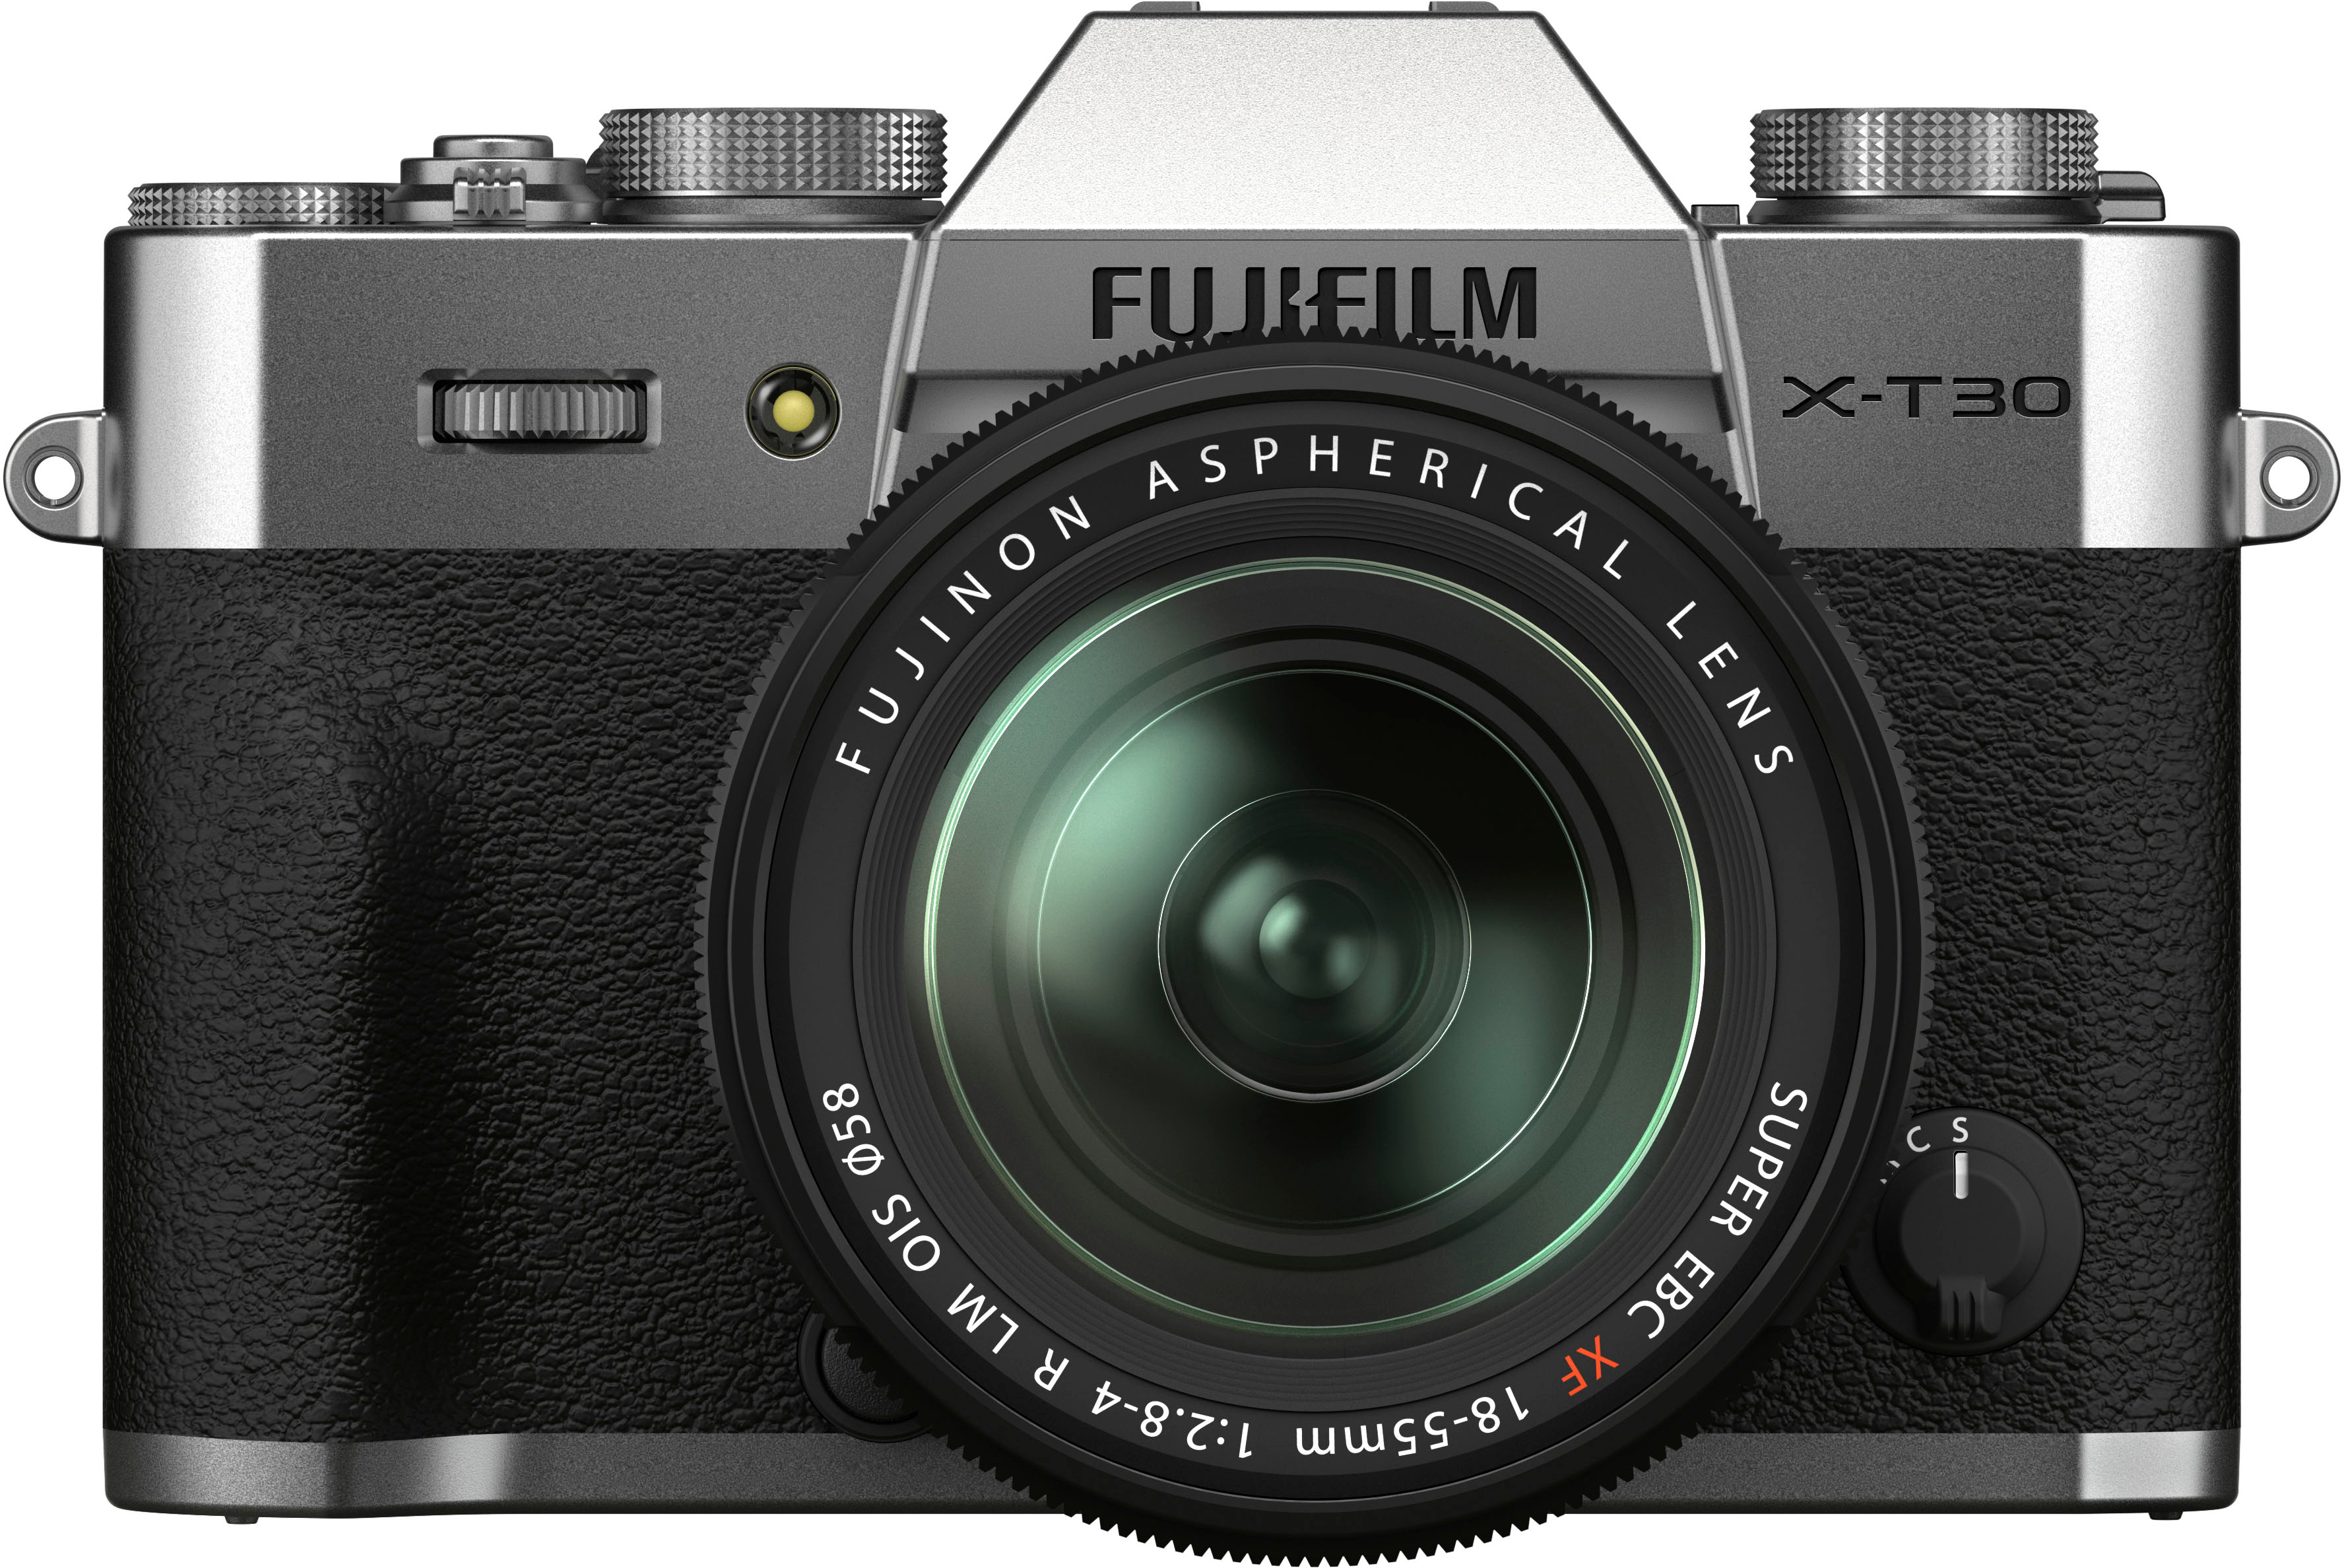 Fujifilm X-T30 Review and X-T30 II Update